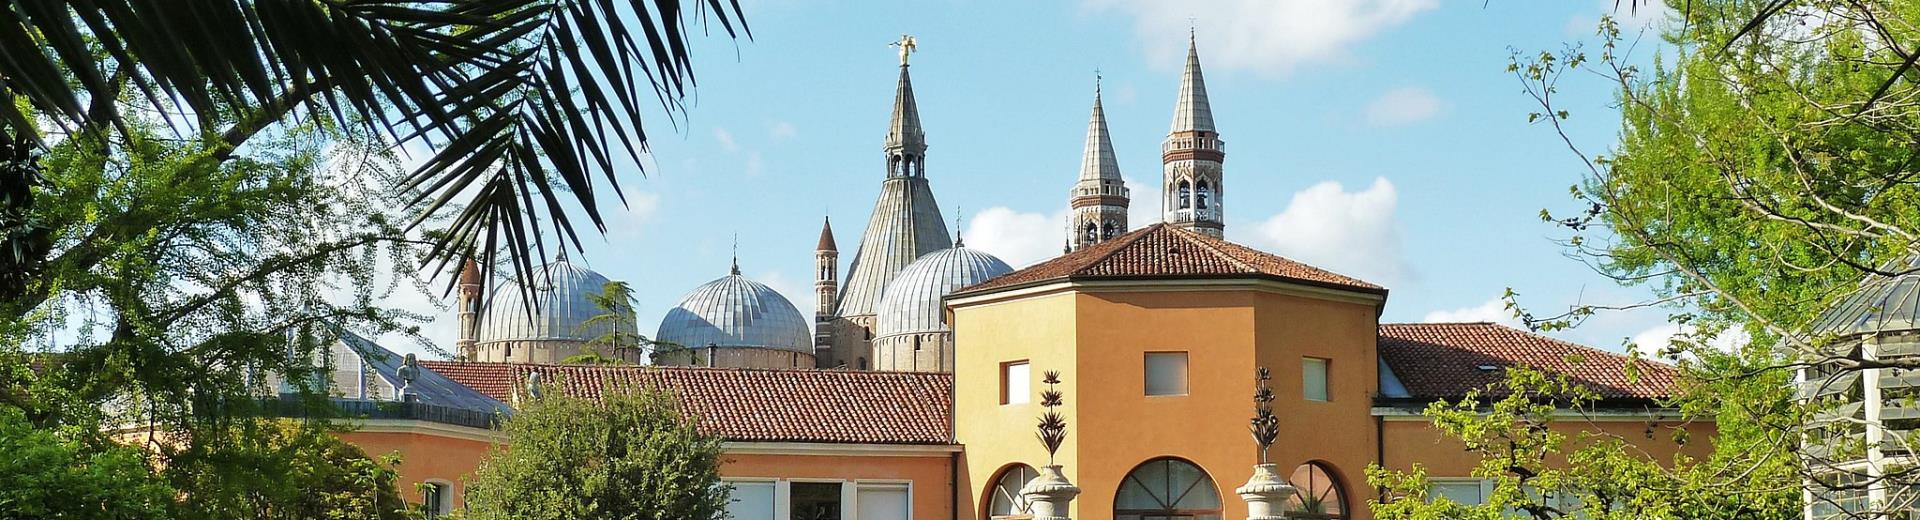 Visit the Botanical Garden in Padua and stay at BW Plus Hotel Galileo